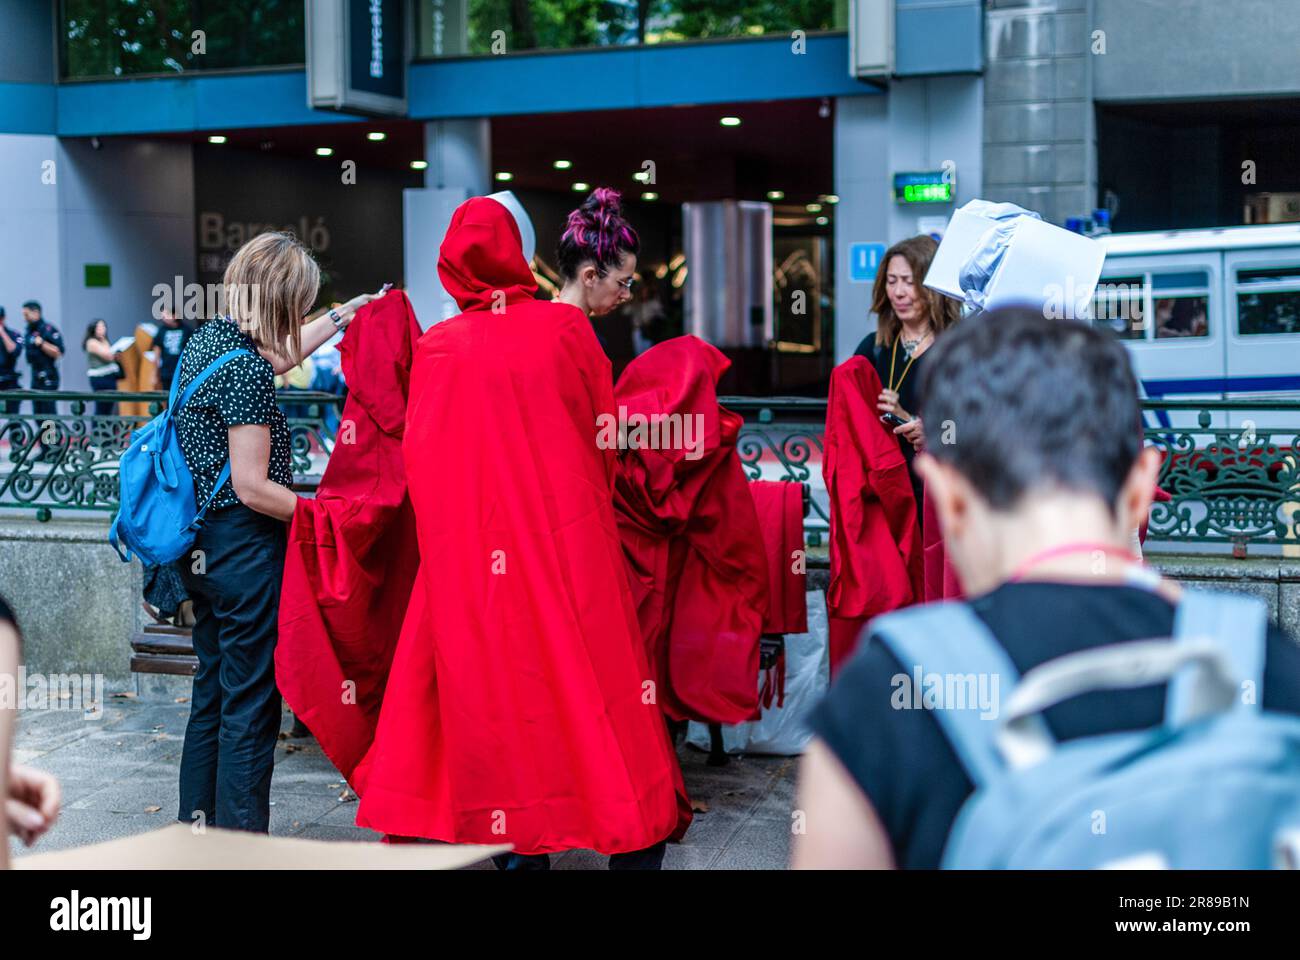 Radical feminist activists dressed in a costume from the series 'The Handmaid's Tale' participate in a demonstration against surrogacy. Stock Photo